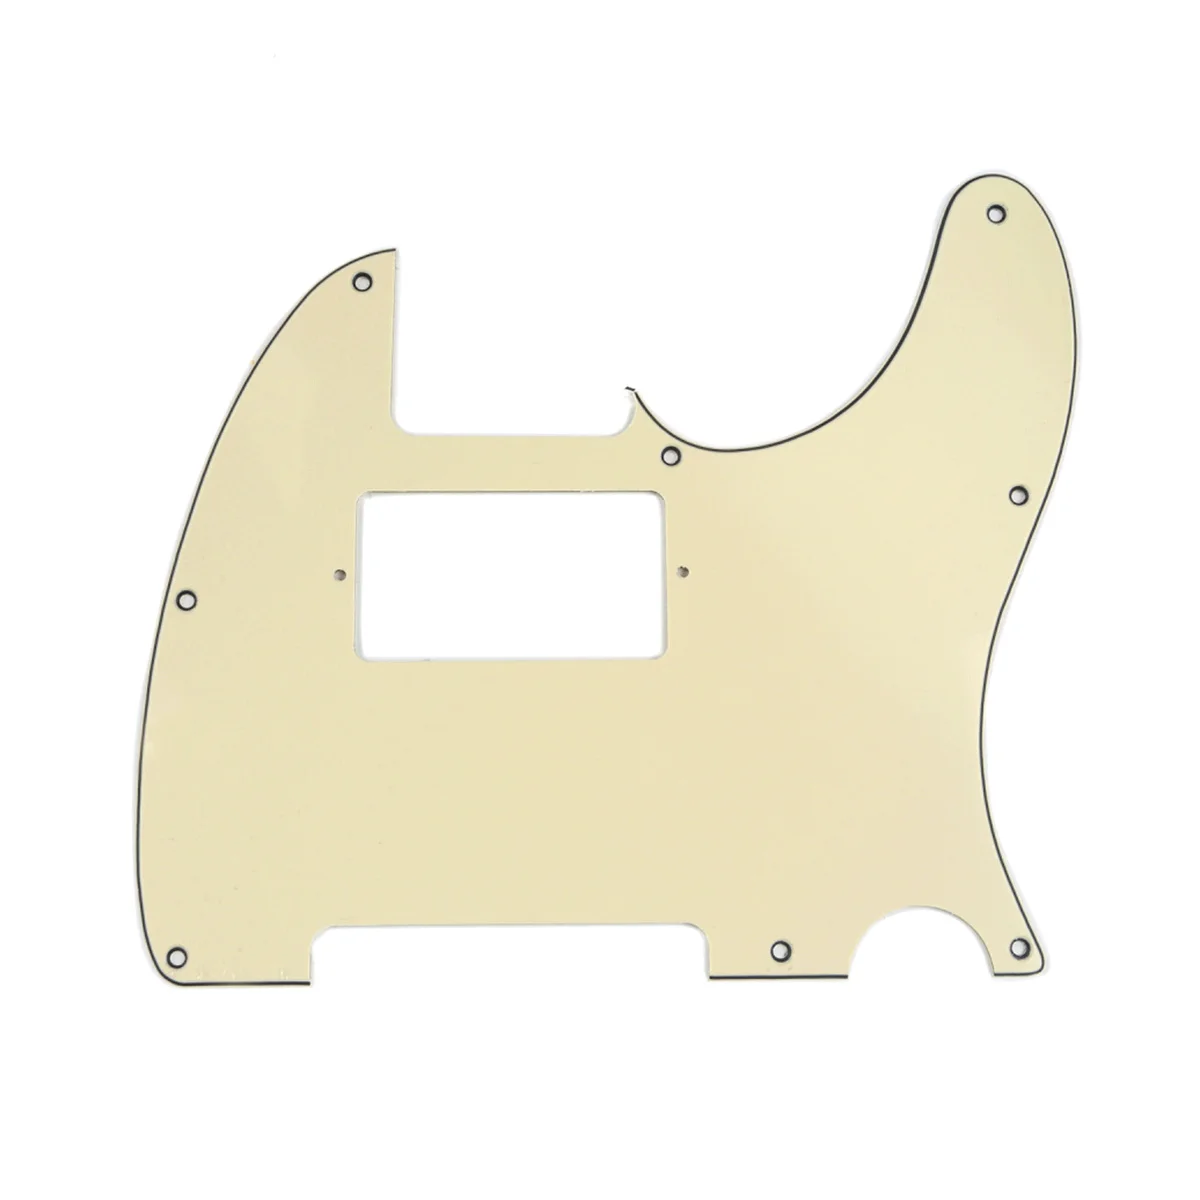 

Musiclily 8 Hole Guitar Tele Pickguard Humbucker HH for USA/Mexican Made Fender Standard Telecaster Style, 3Ply Cream